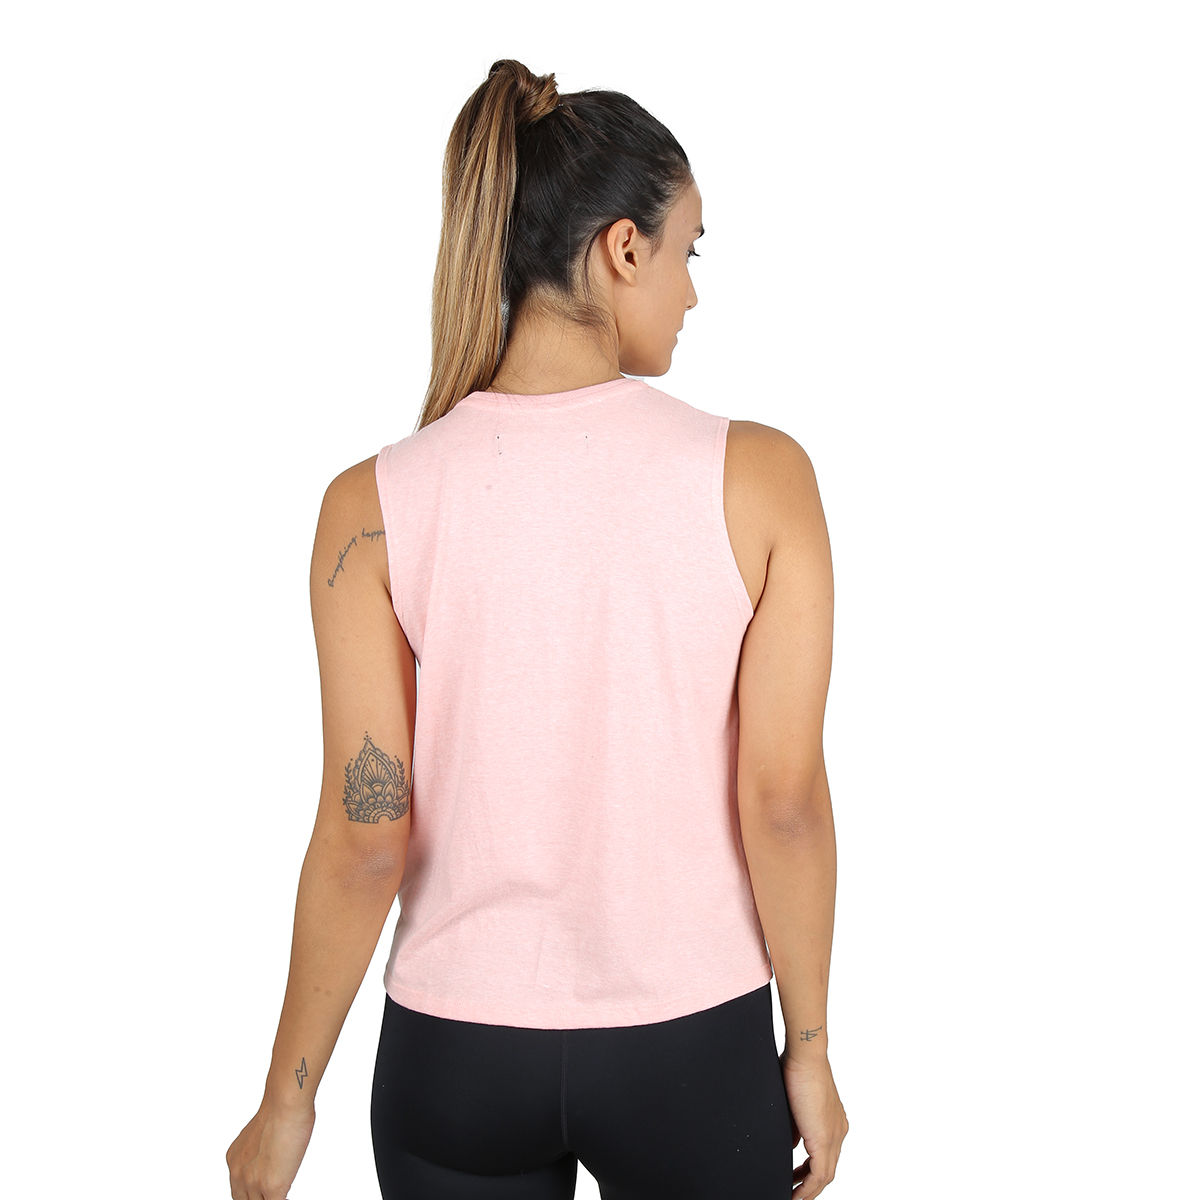 Remera Entrenamiento Topper Basicos Mujer,  image number null